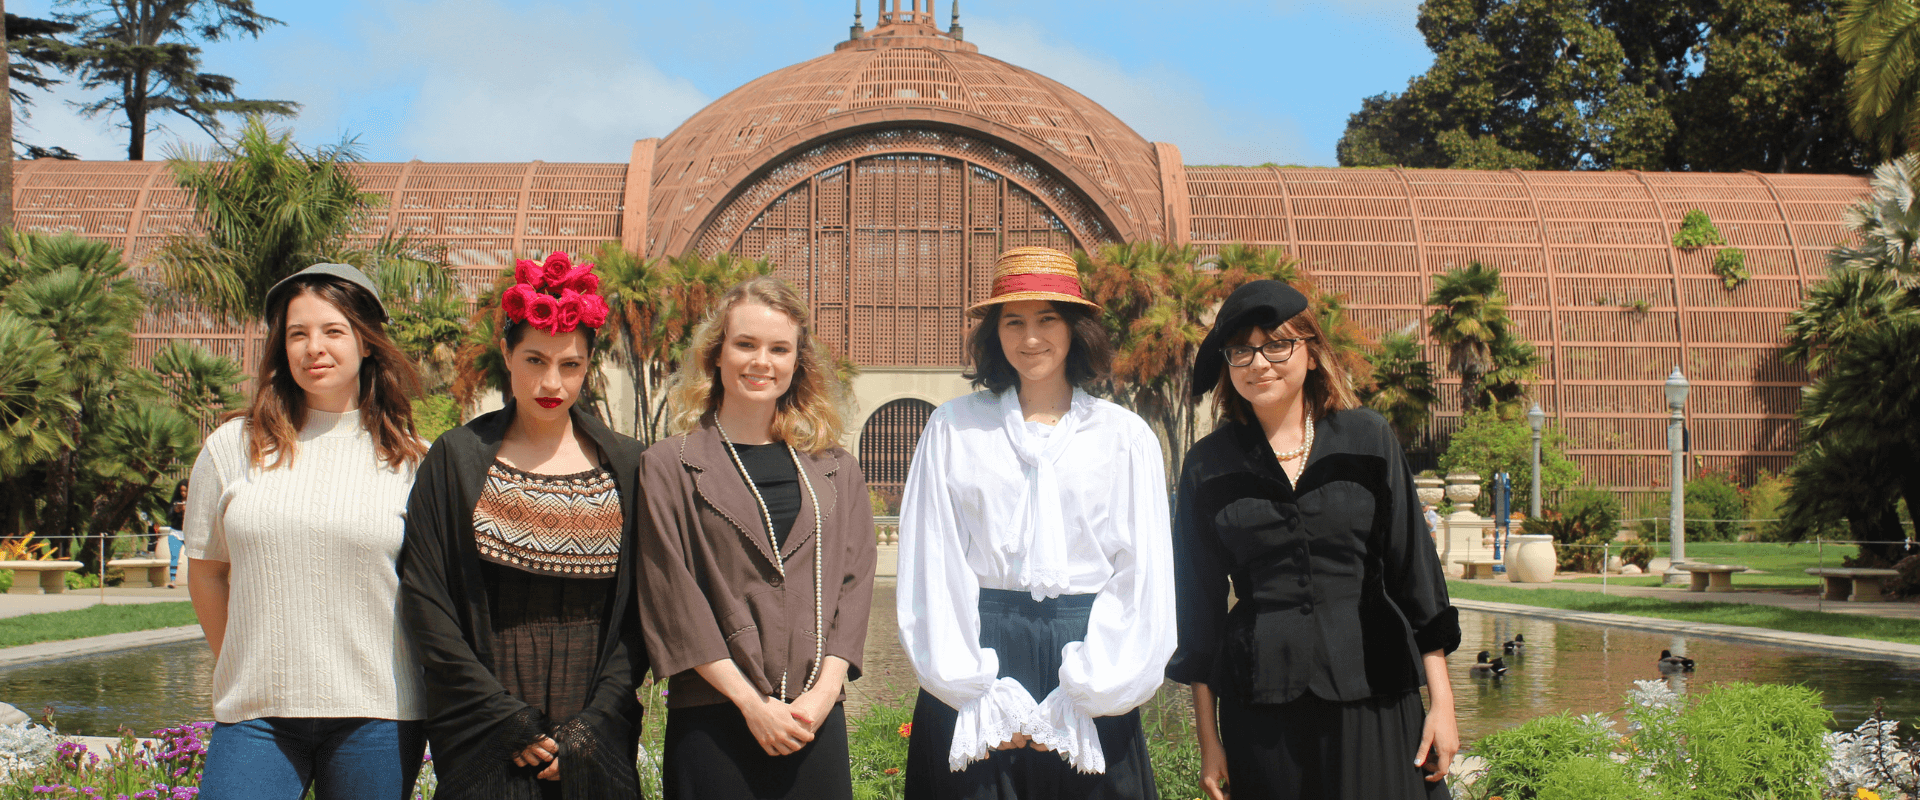 A group of people dressed as important women in women's history standing in front of the lily pond and the Botanical building.